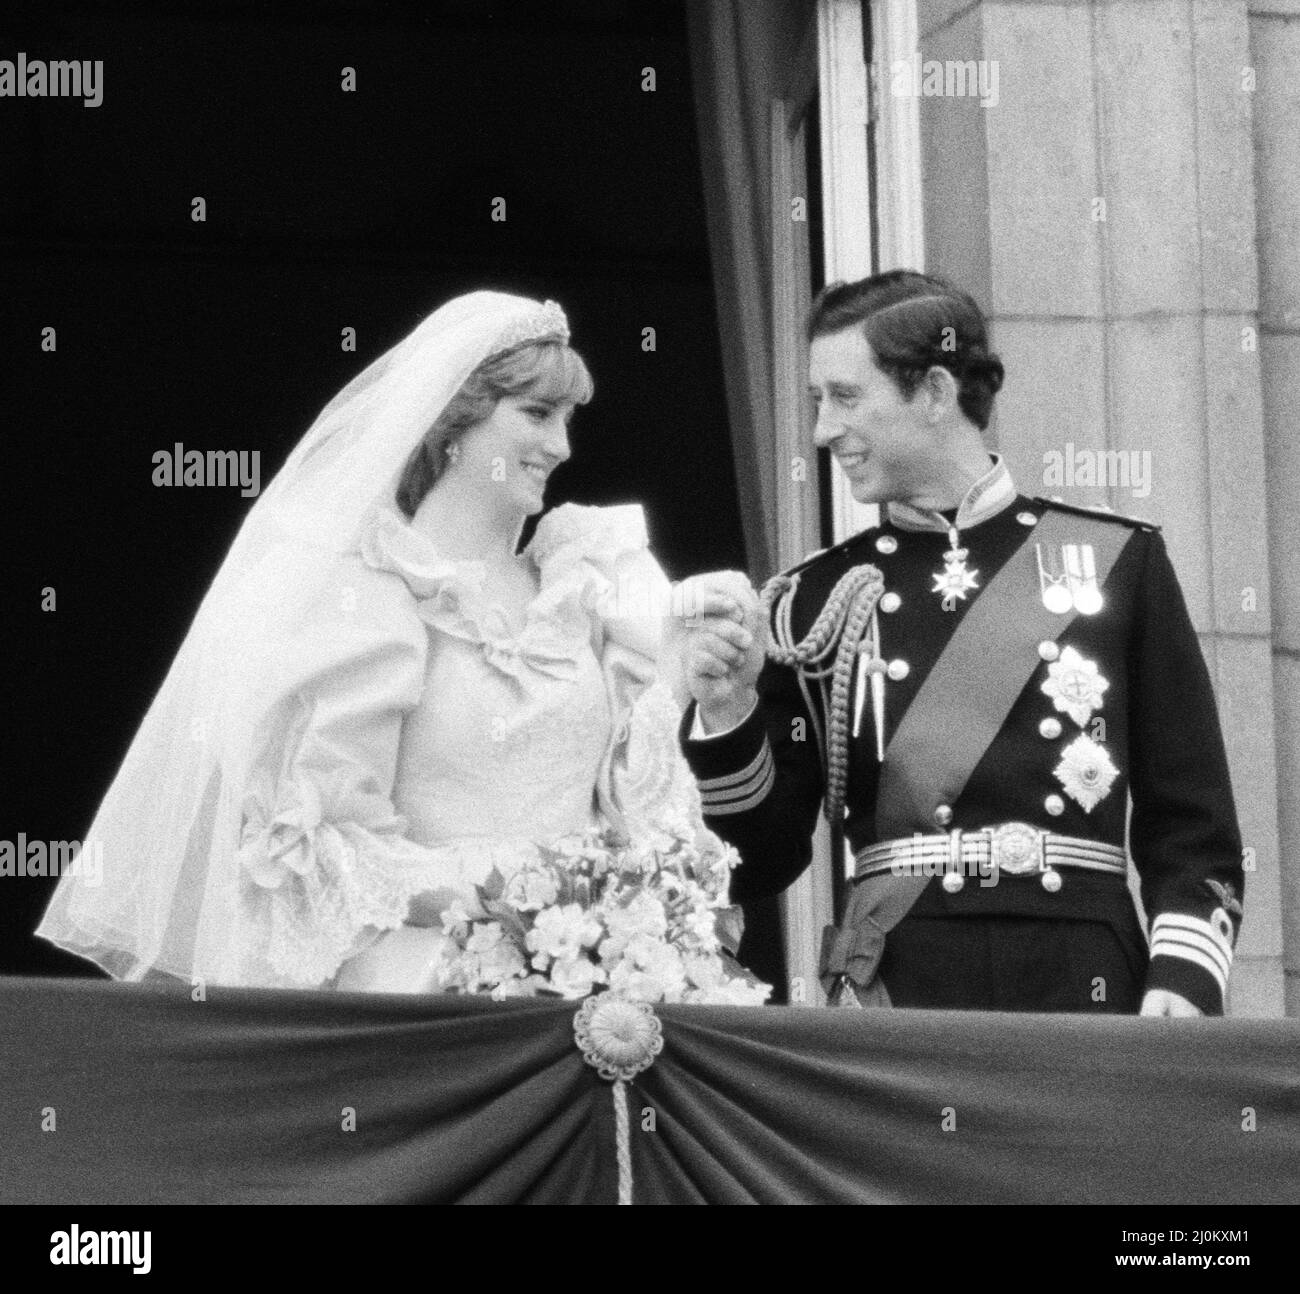 **CROPPED VERSION - ORIGINAL WIDE FRAME ALSO IN THIS SET*** Prince Charles marries Lady Diana Spencer.  Picture taken of the happy couple on the balcony at Buckingham Palace after the wedding ceremony.  Picture taken 29th July 1981. Stock Photo